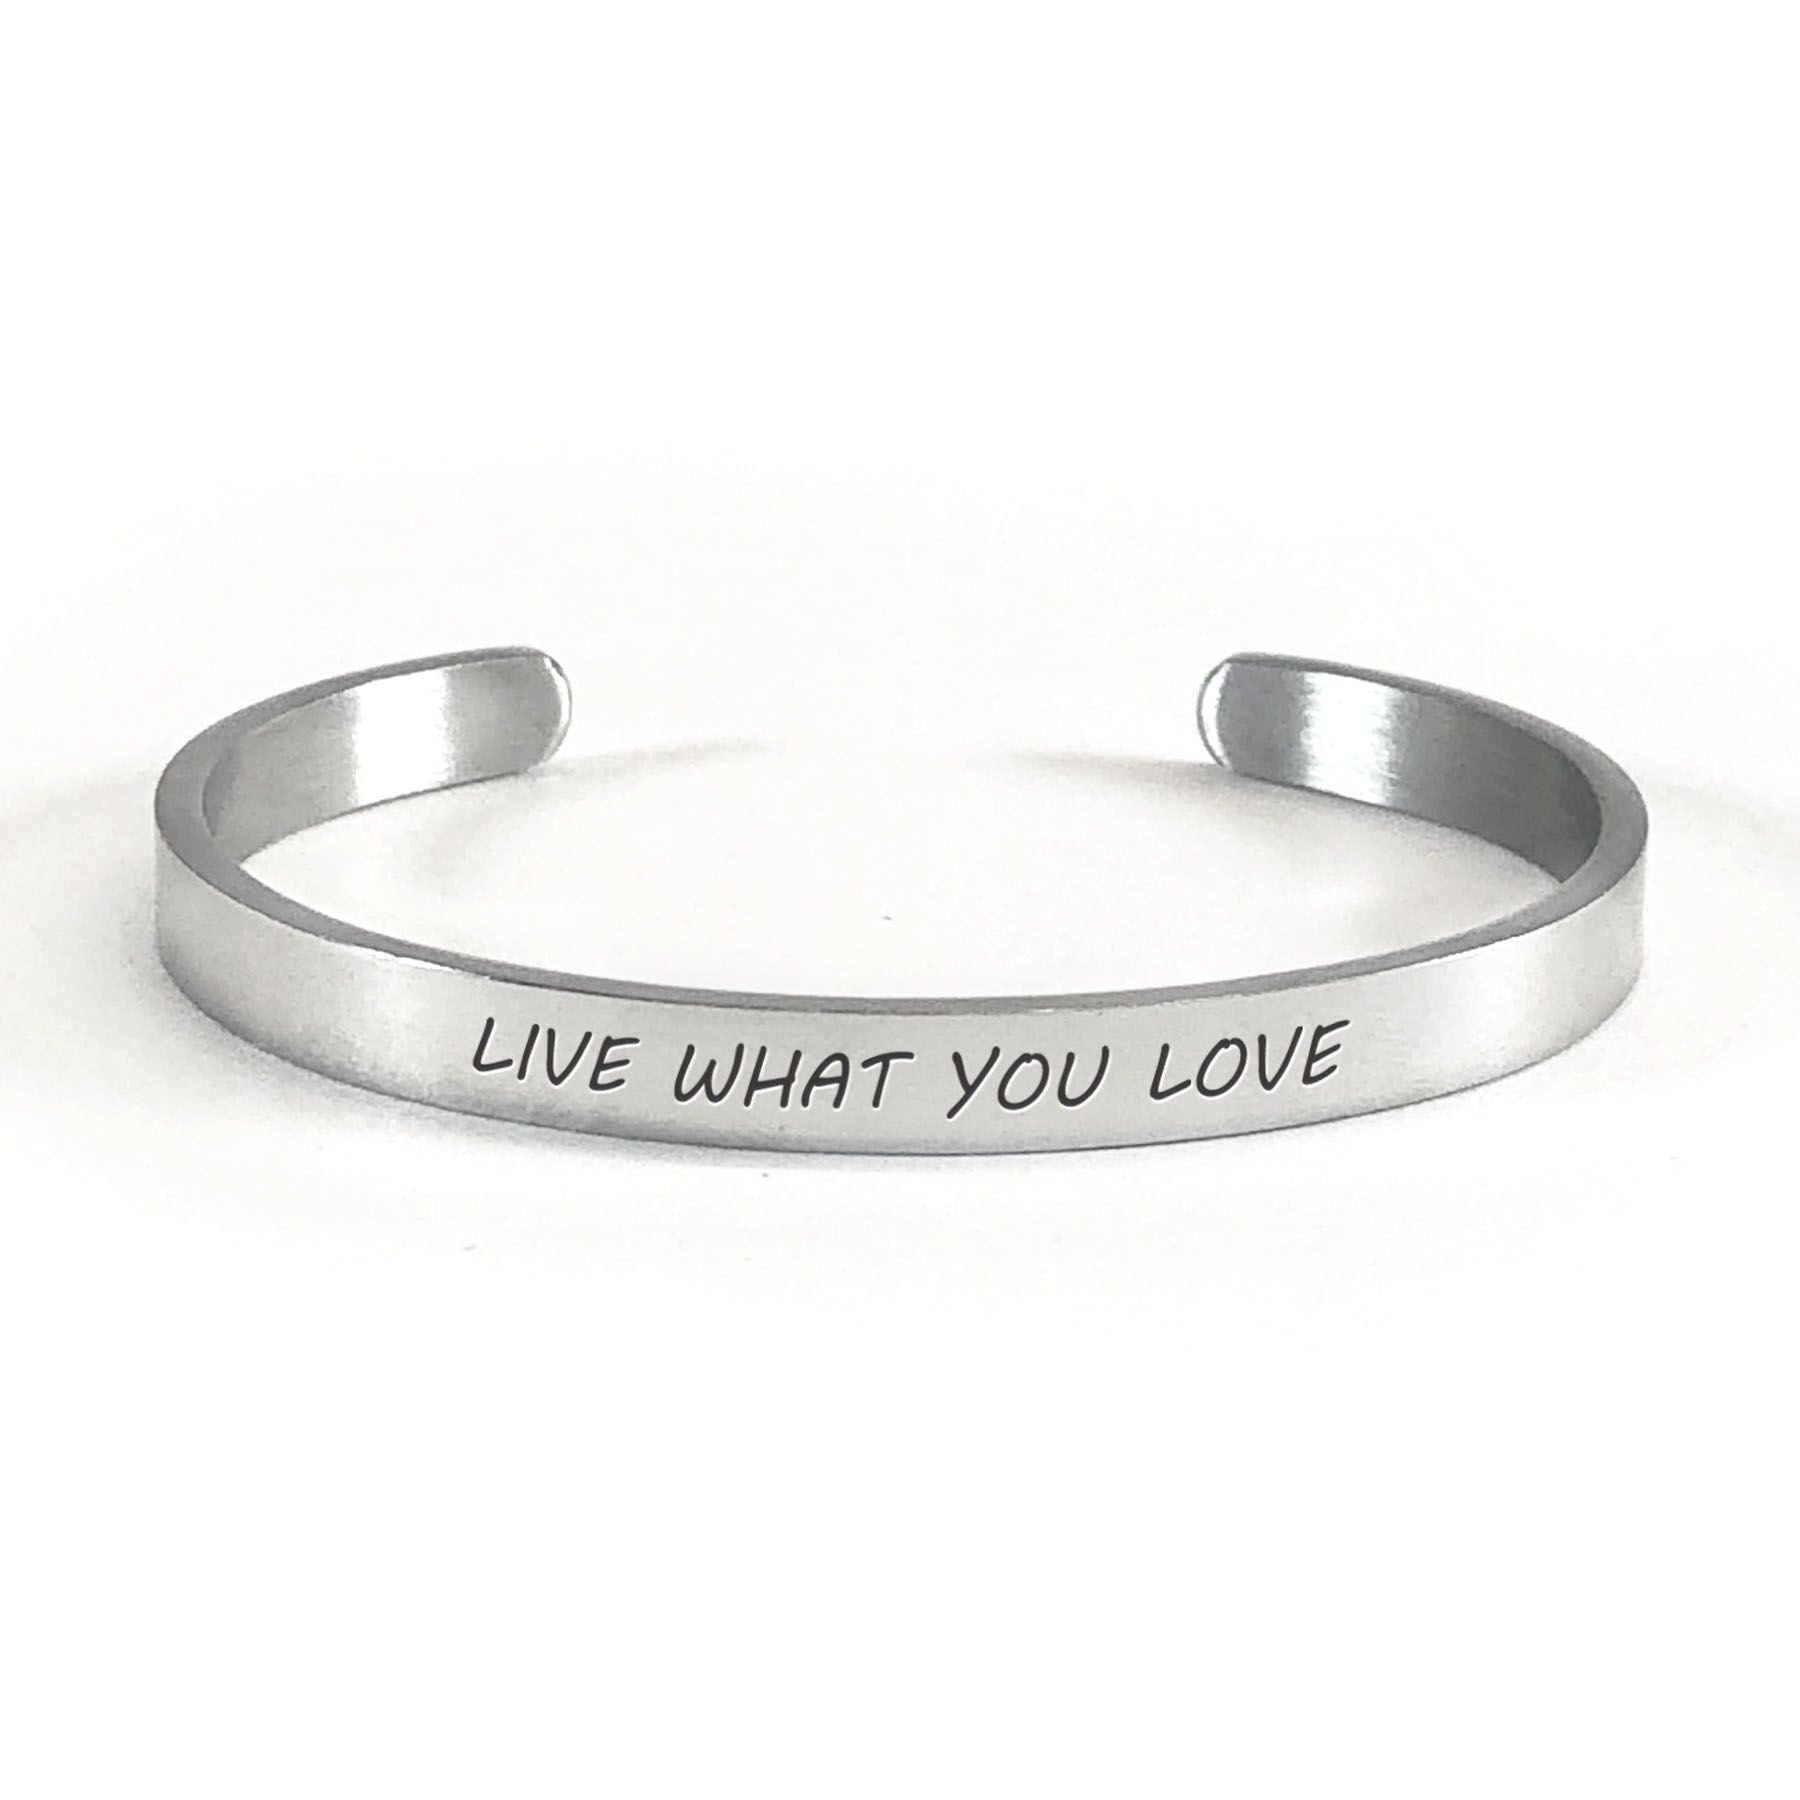 Live what you love bracelet with silver plating